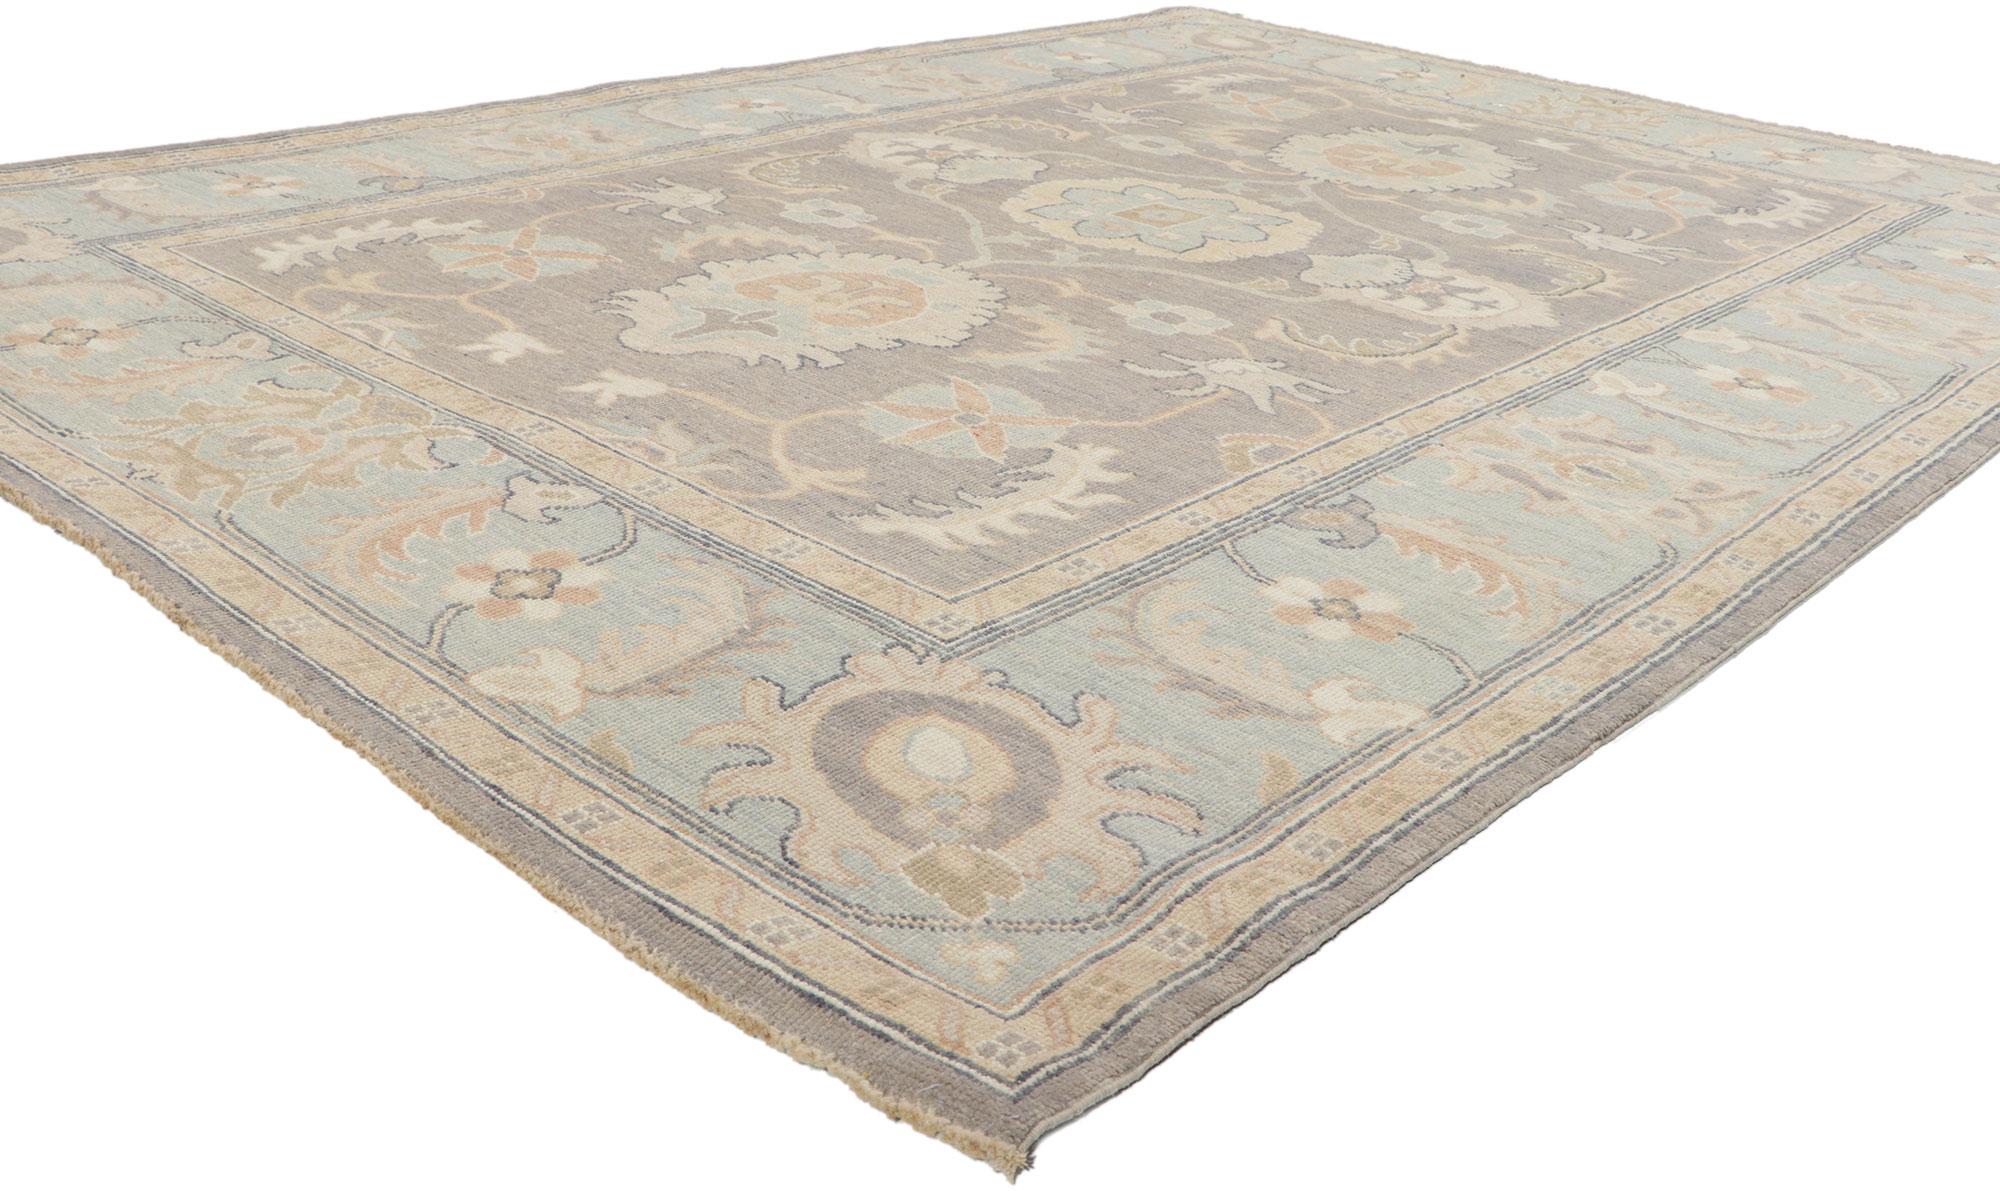 80941 New Vintage-Inspired Oushak Rug with Soft Colors 06'02 x 08'10.
Serene and sophisticated, this hand-knotted wool vintage-inspired Oushak rug beautifully embodies a modern style. The composition features an all-over botanical pattern composed